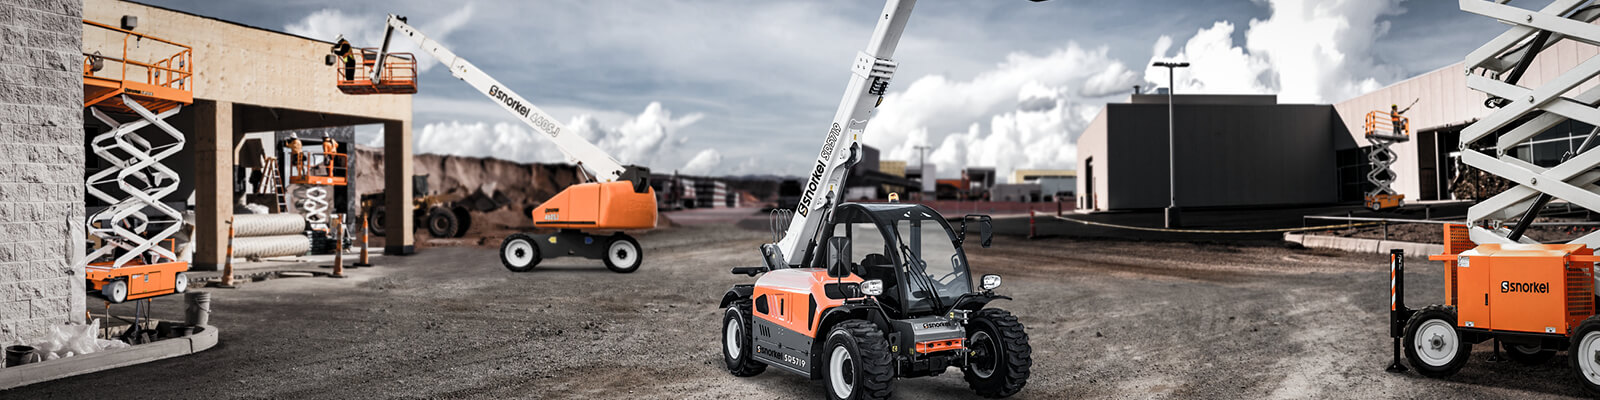 Snorkel offers a variety of aerial lifts for all types of applications.